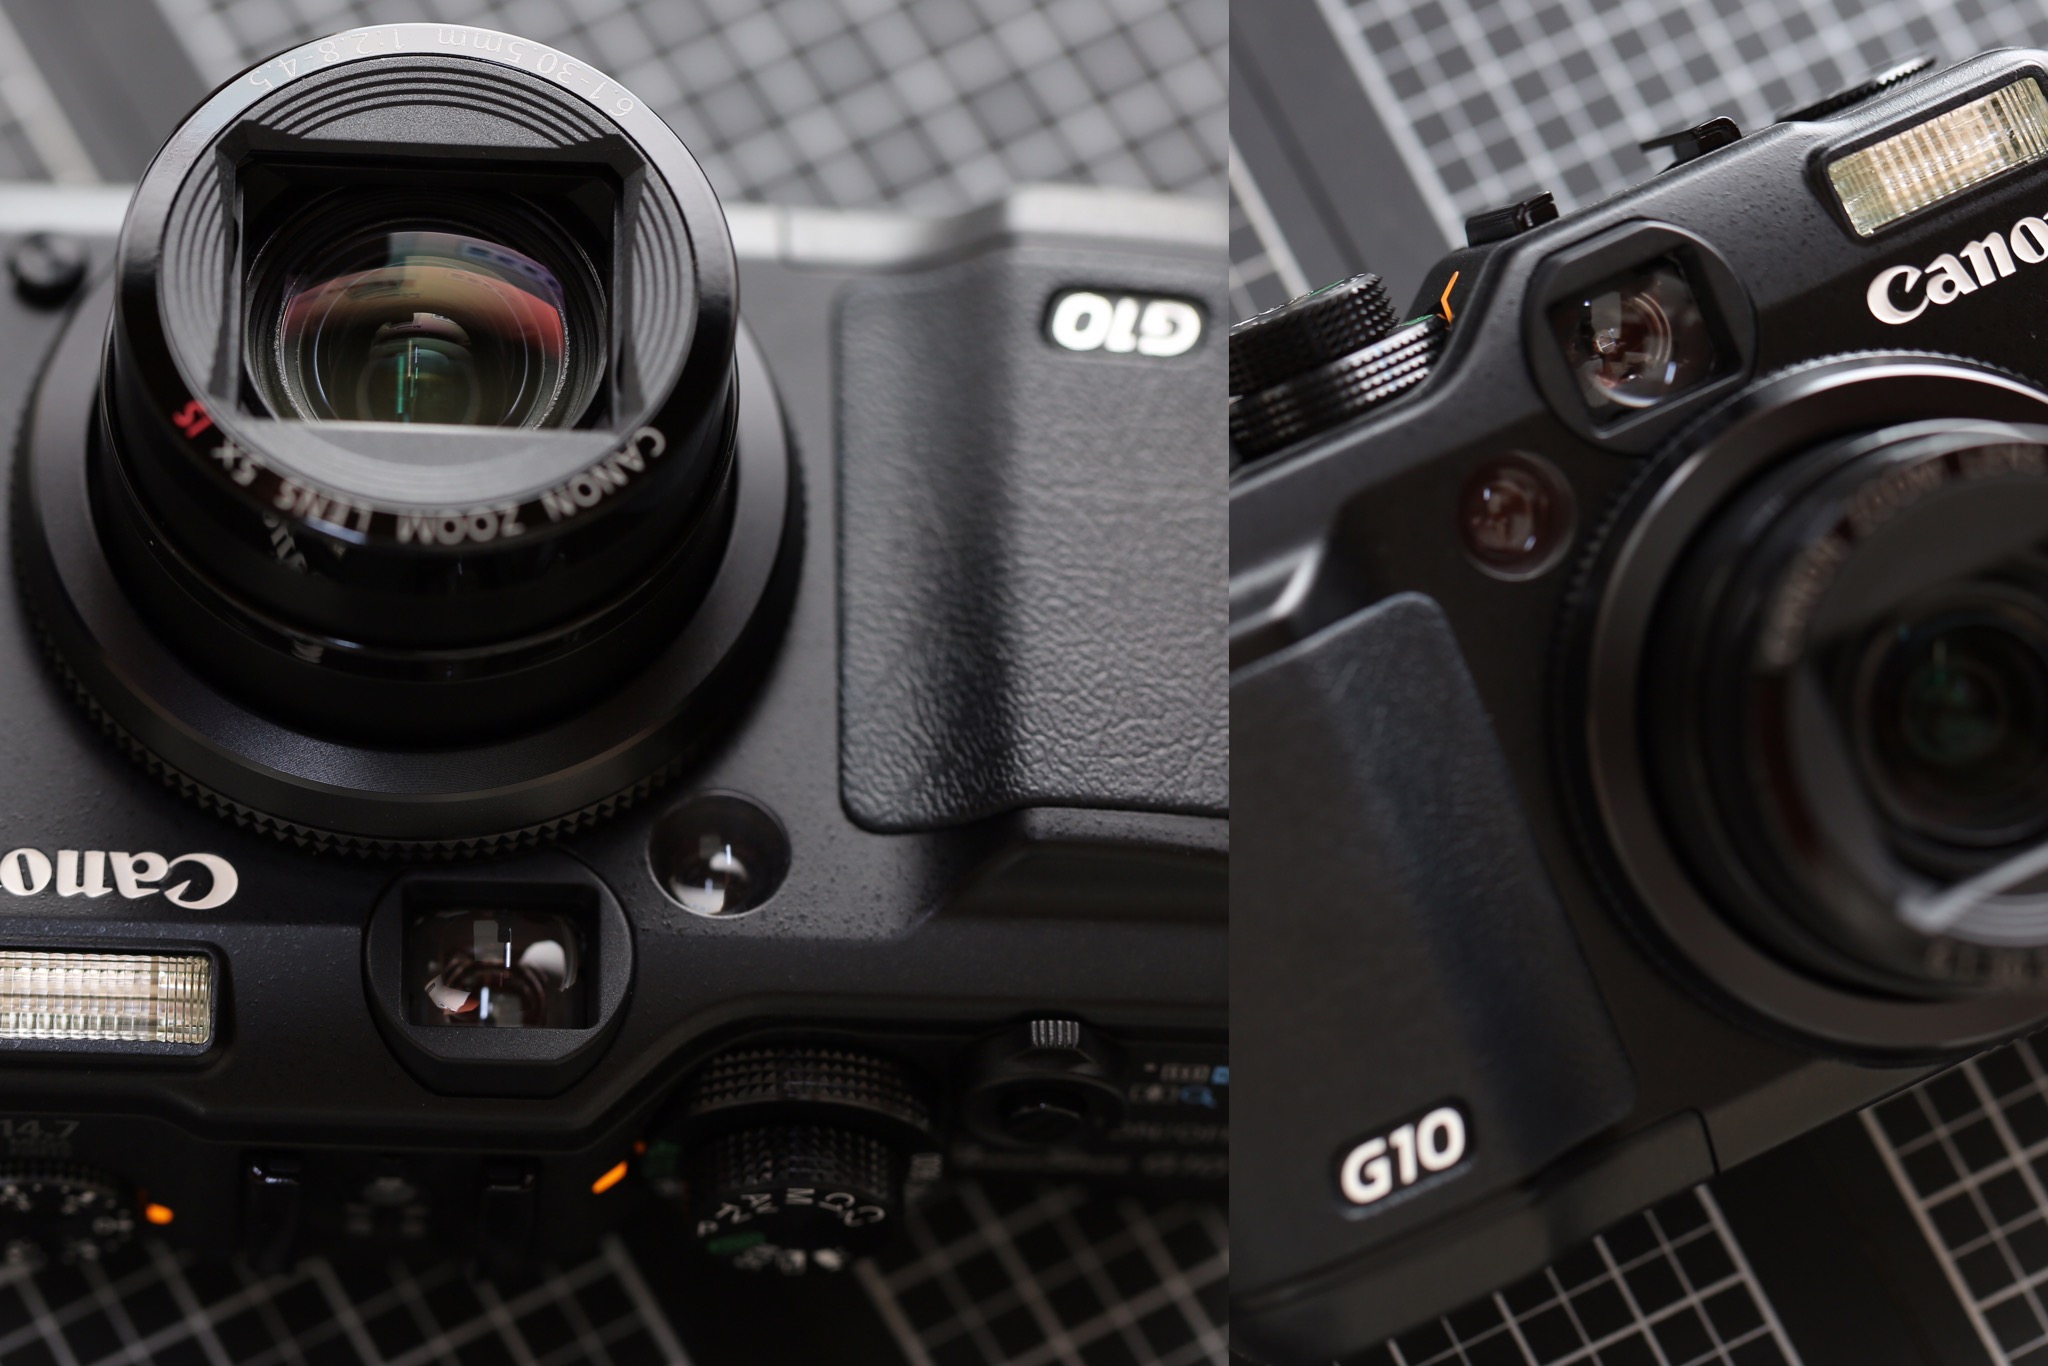 Photo Movie】Canon PowerShot G10 | THE MAP TIMES